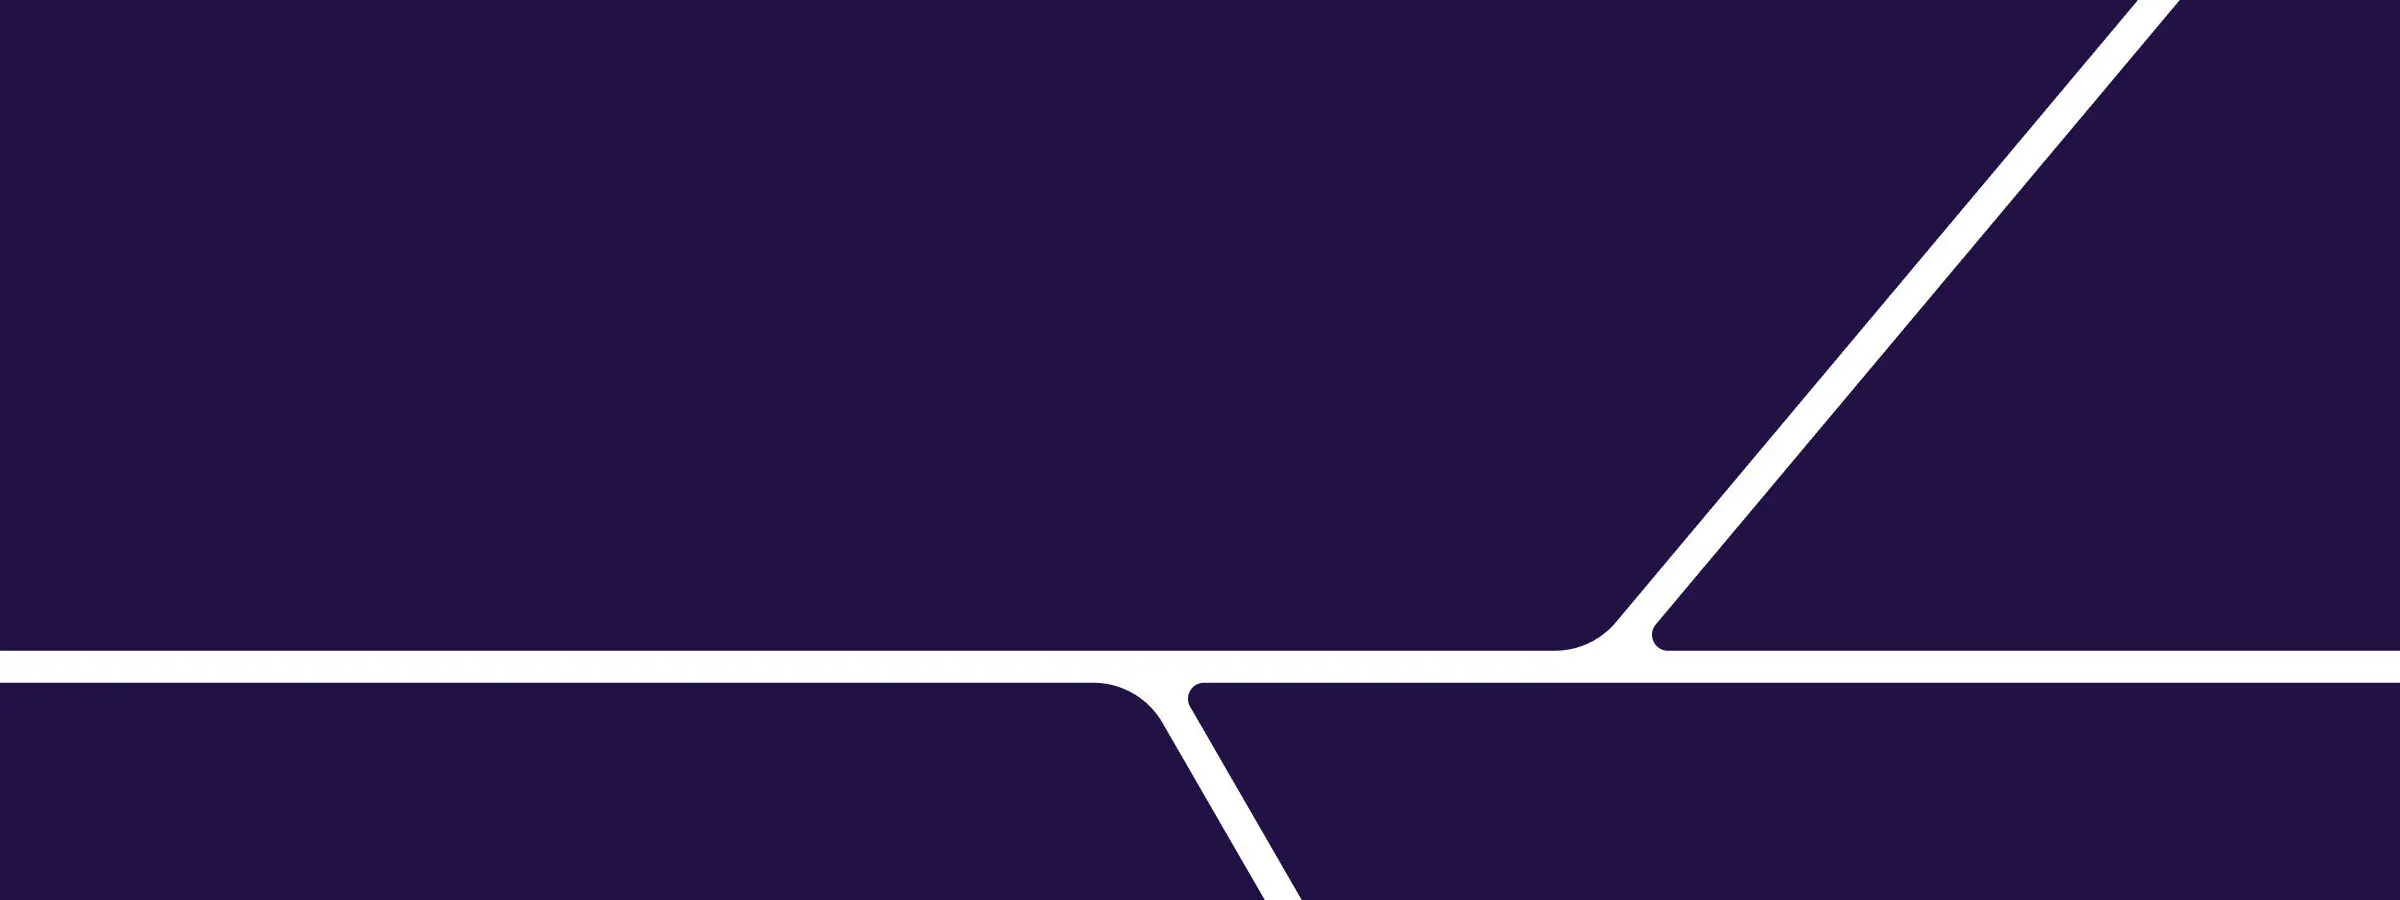 Graphic of white lines on purple background. 